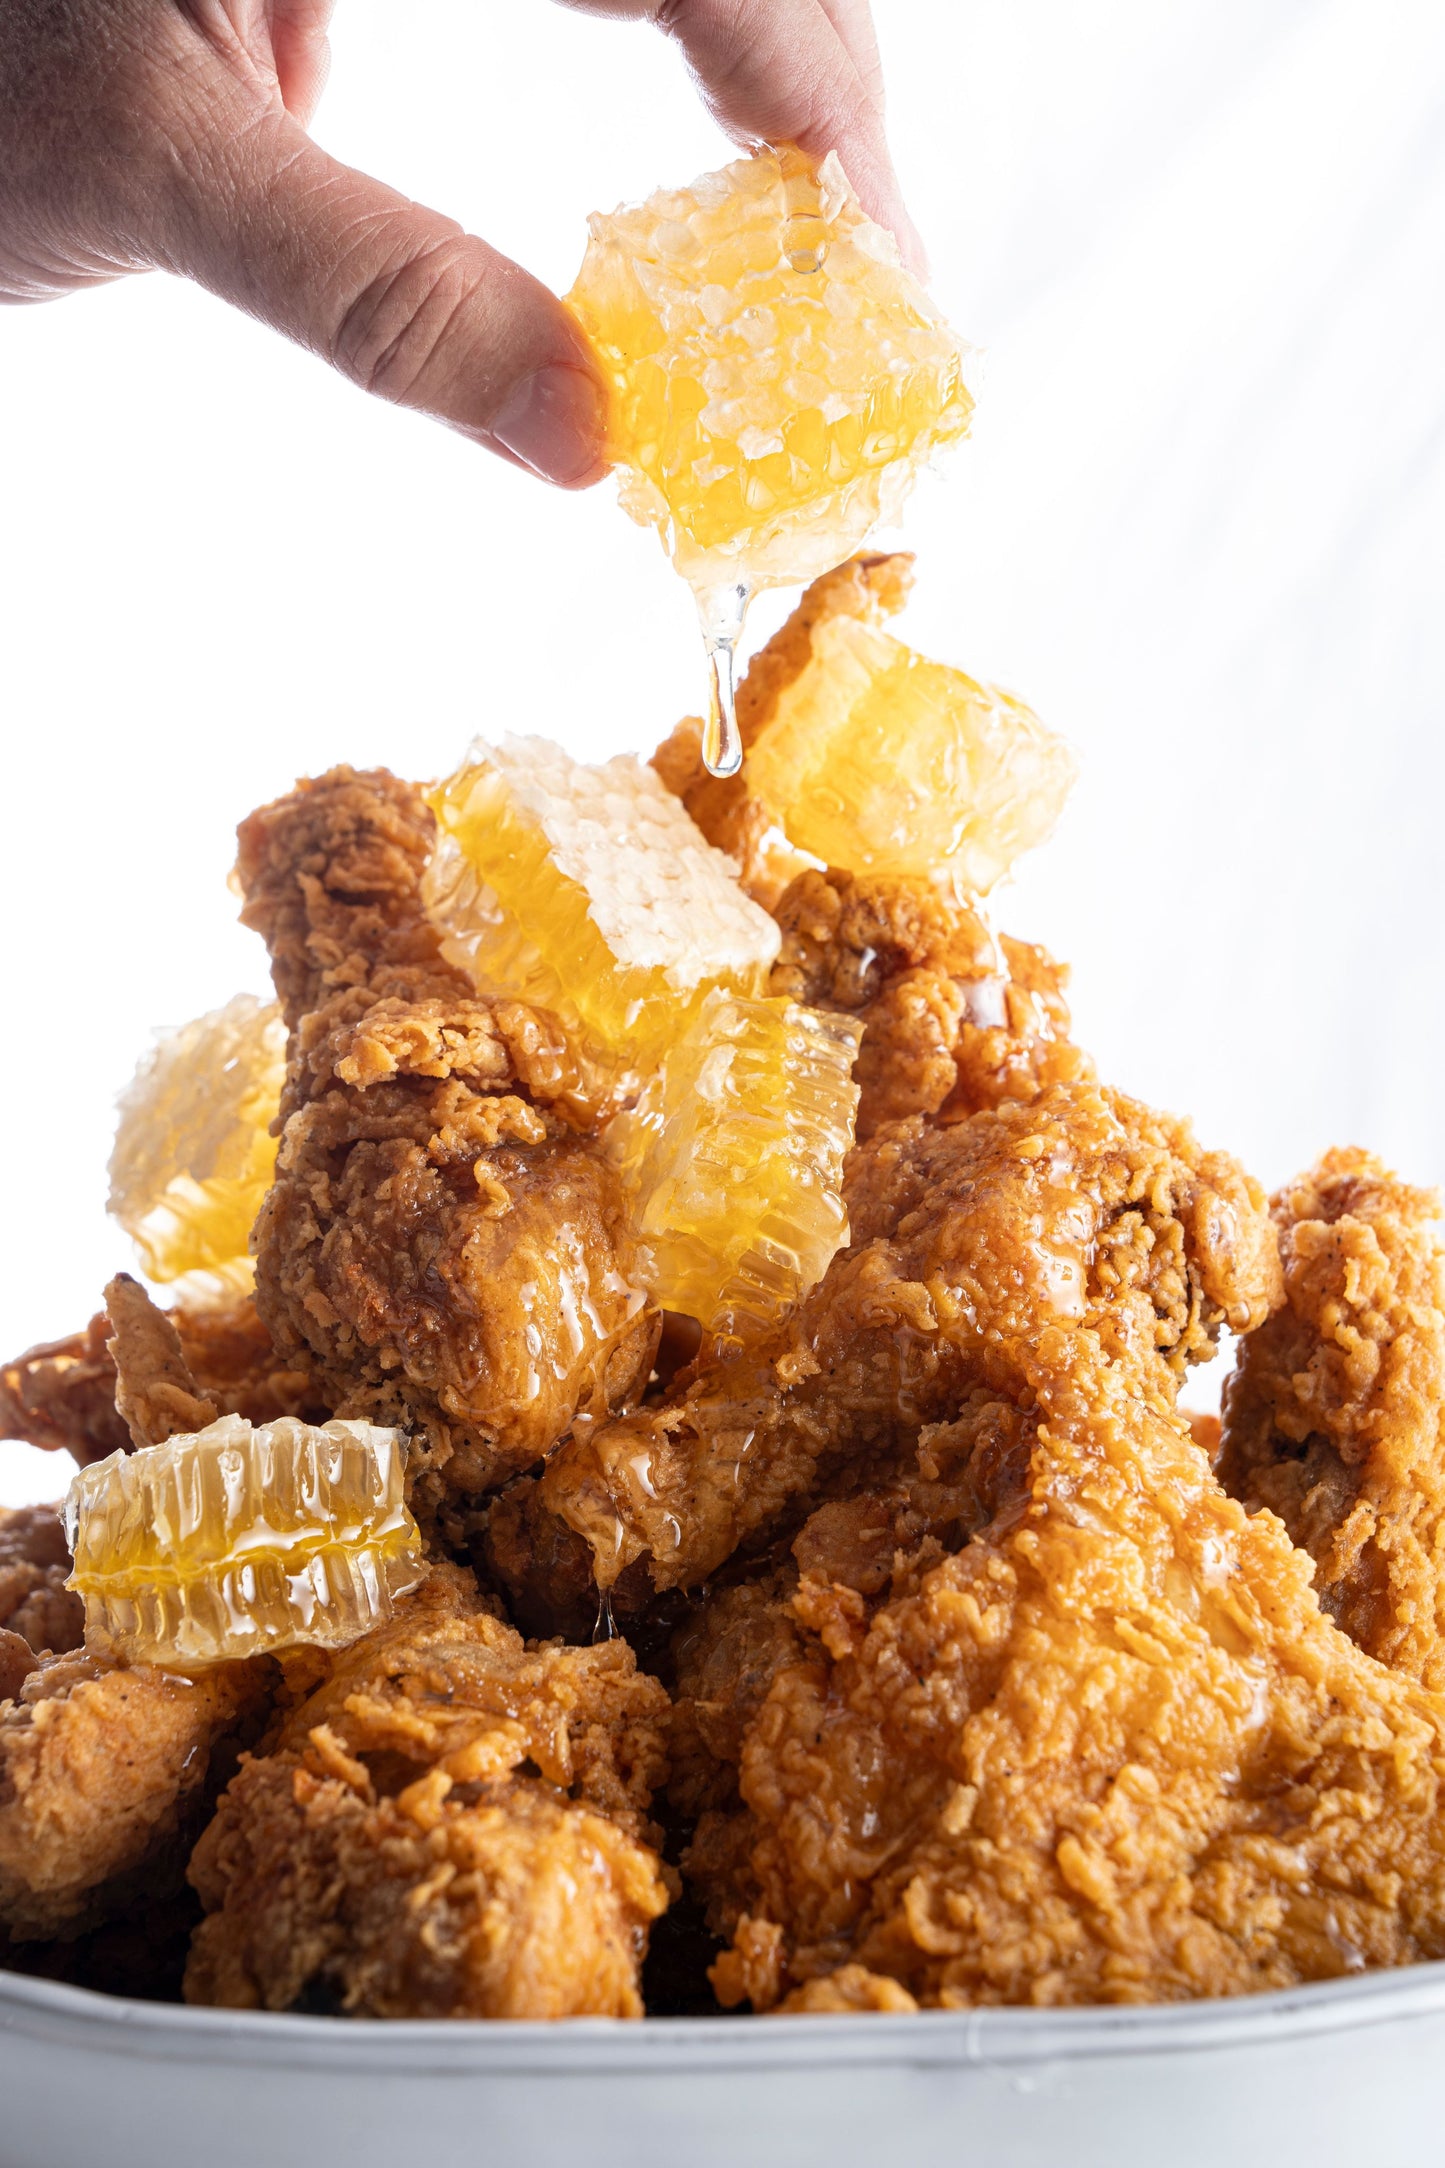 Fried chicken plate with chunks of honeycomb.